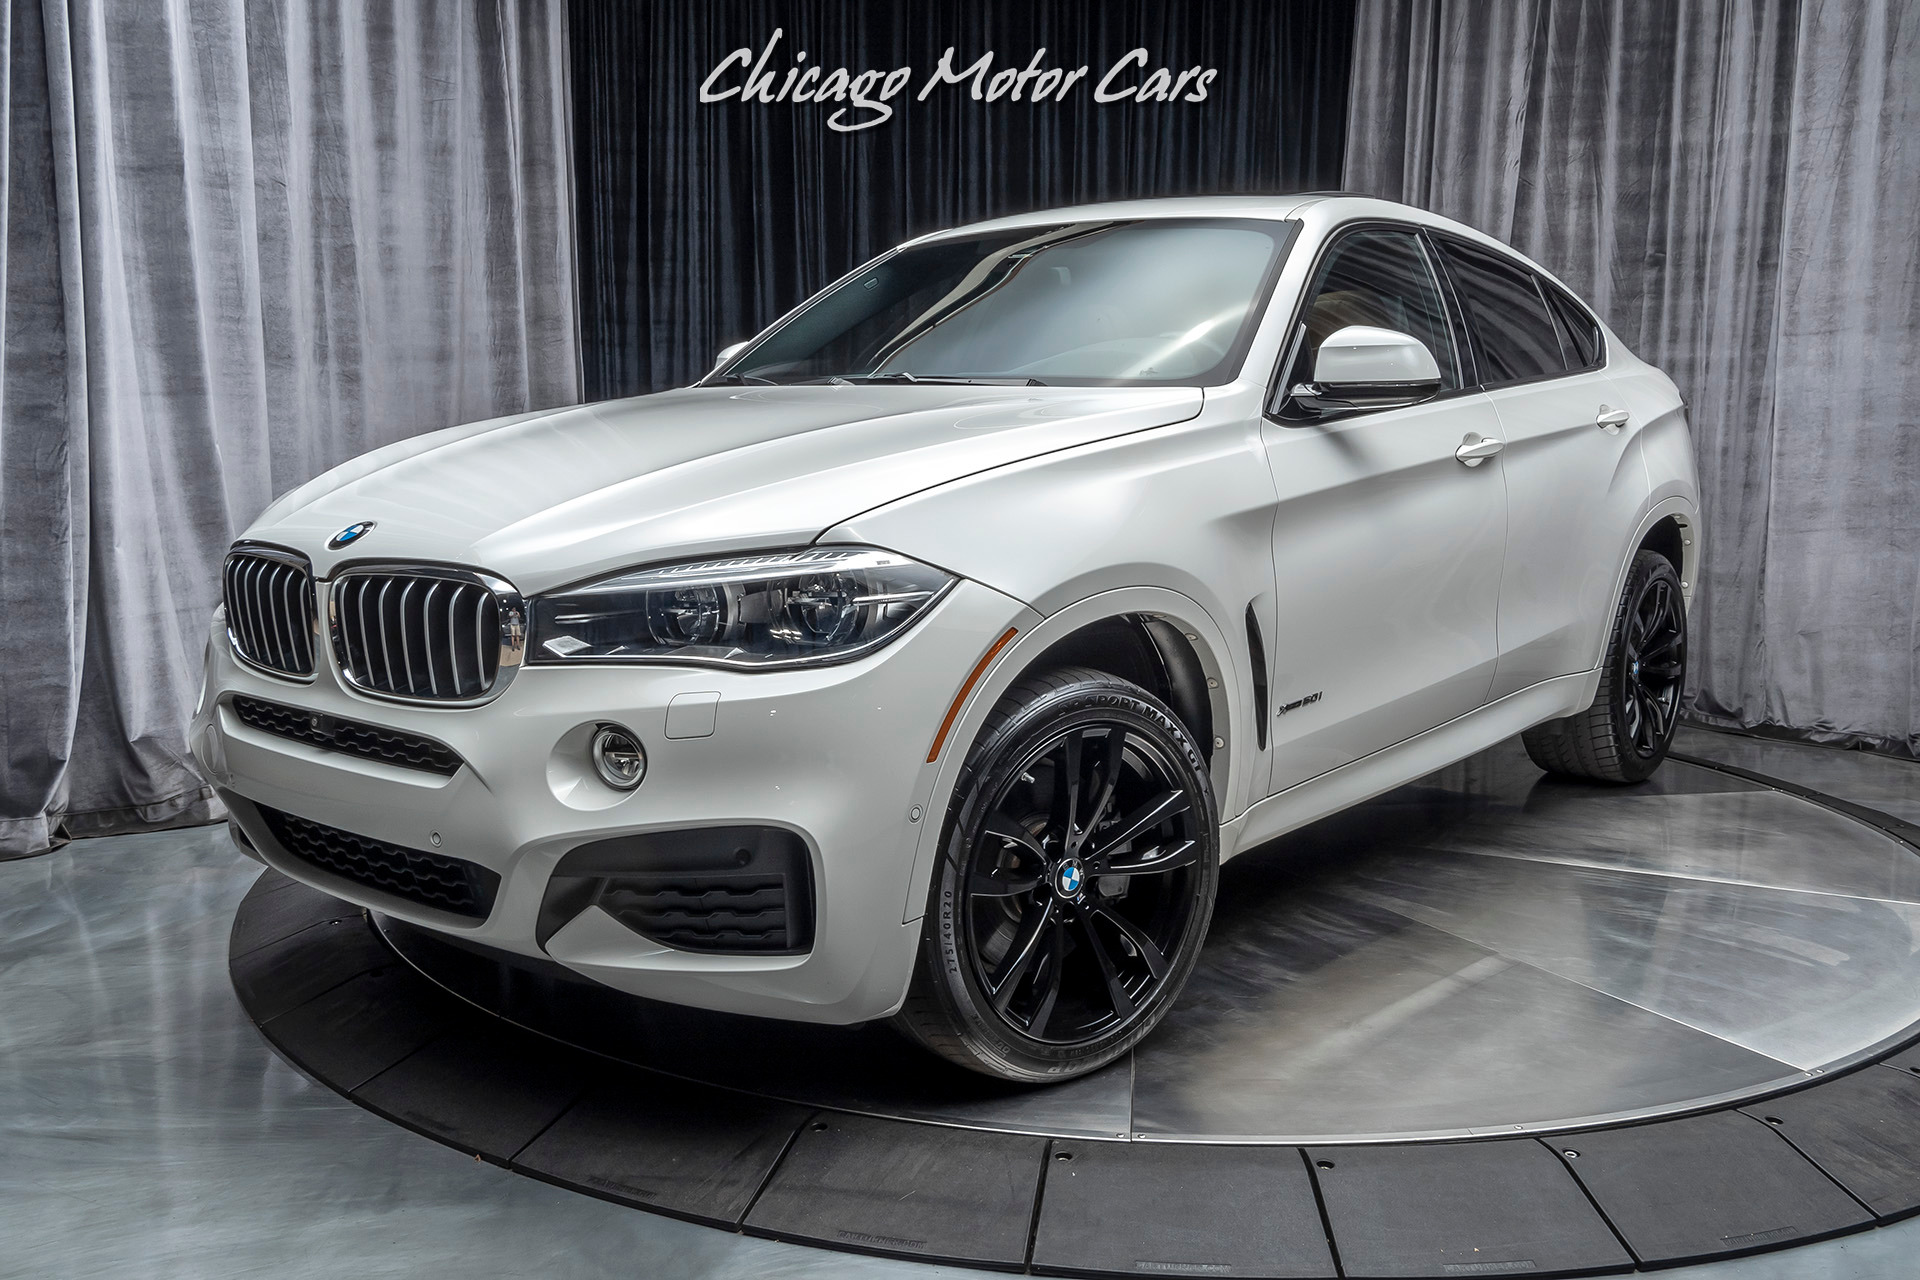 Used-2017-BMW-X6-xDrive50i-SUV-MSRP-91845-EXECUTIVE---M-SPORT-PACKAGES